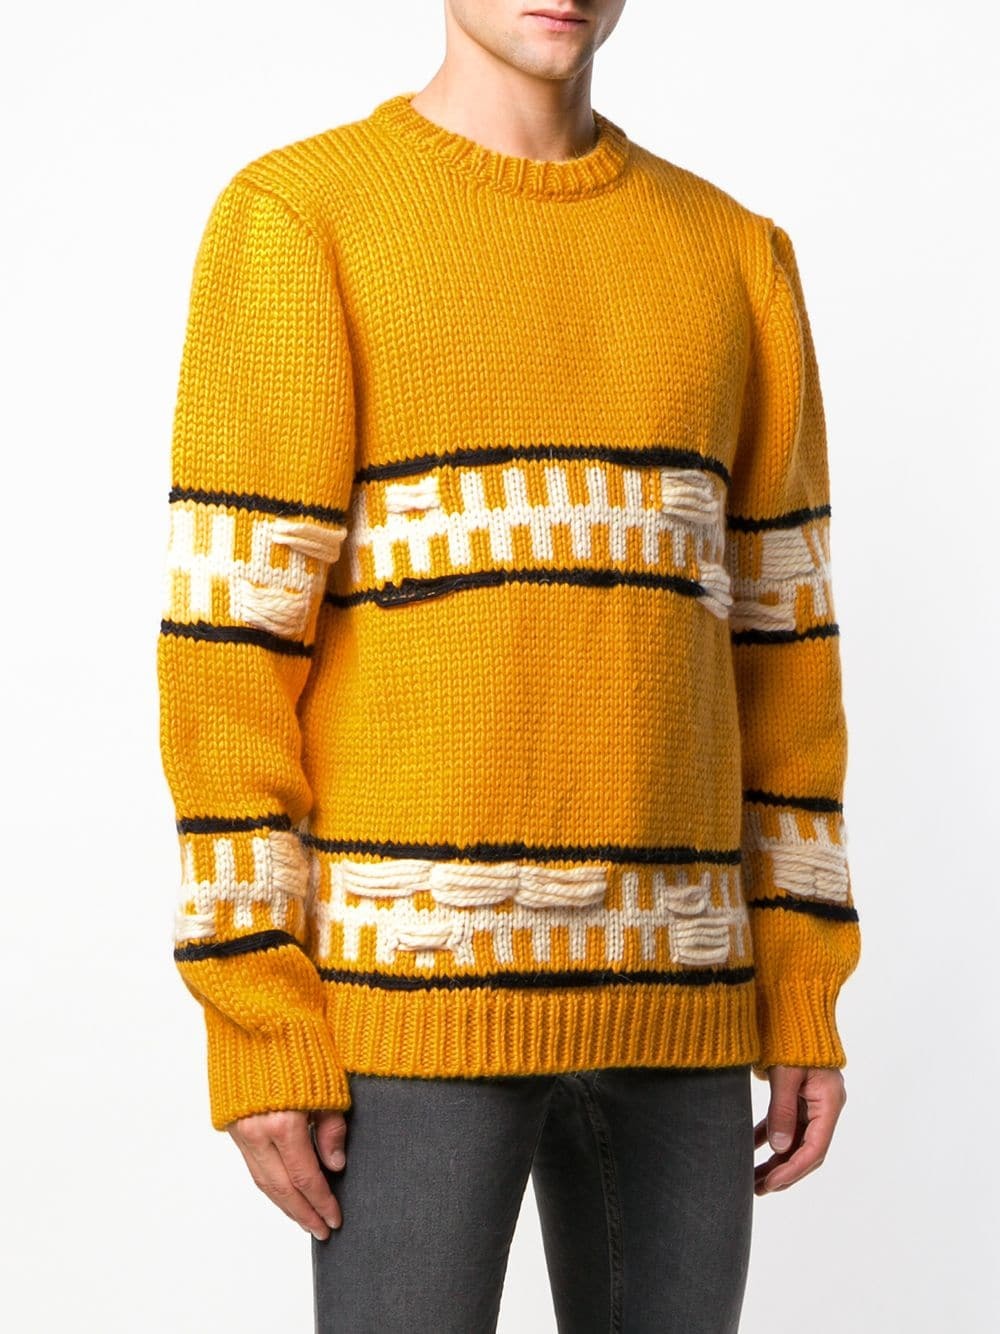 Calvin Klein 205W39nyc Knitted Jumper, $392  | Lookastic